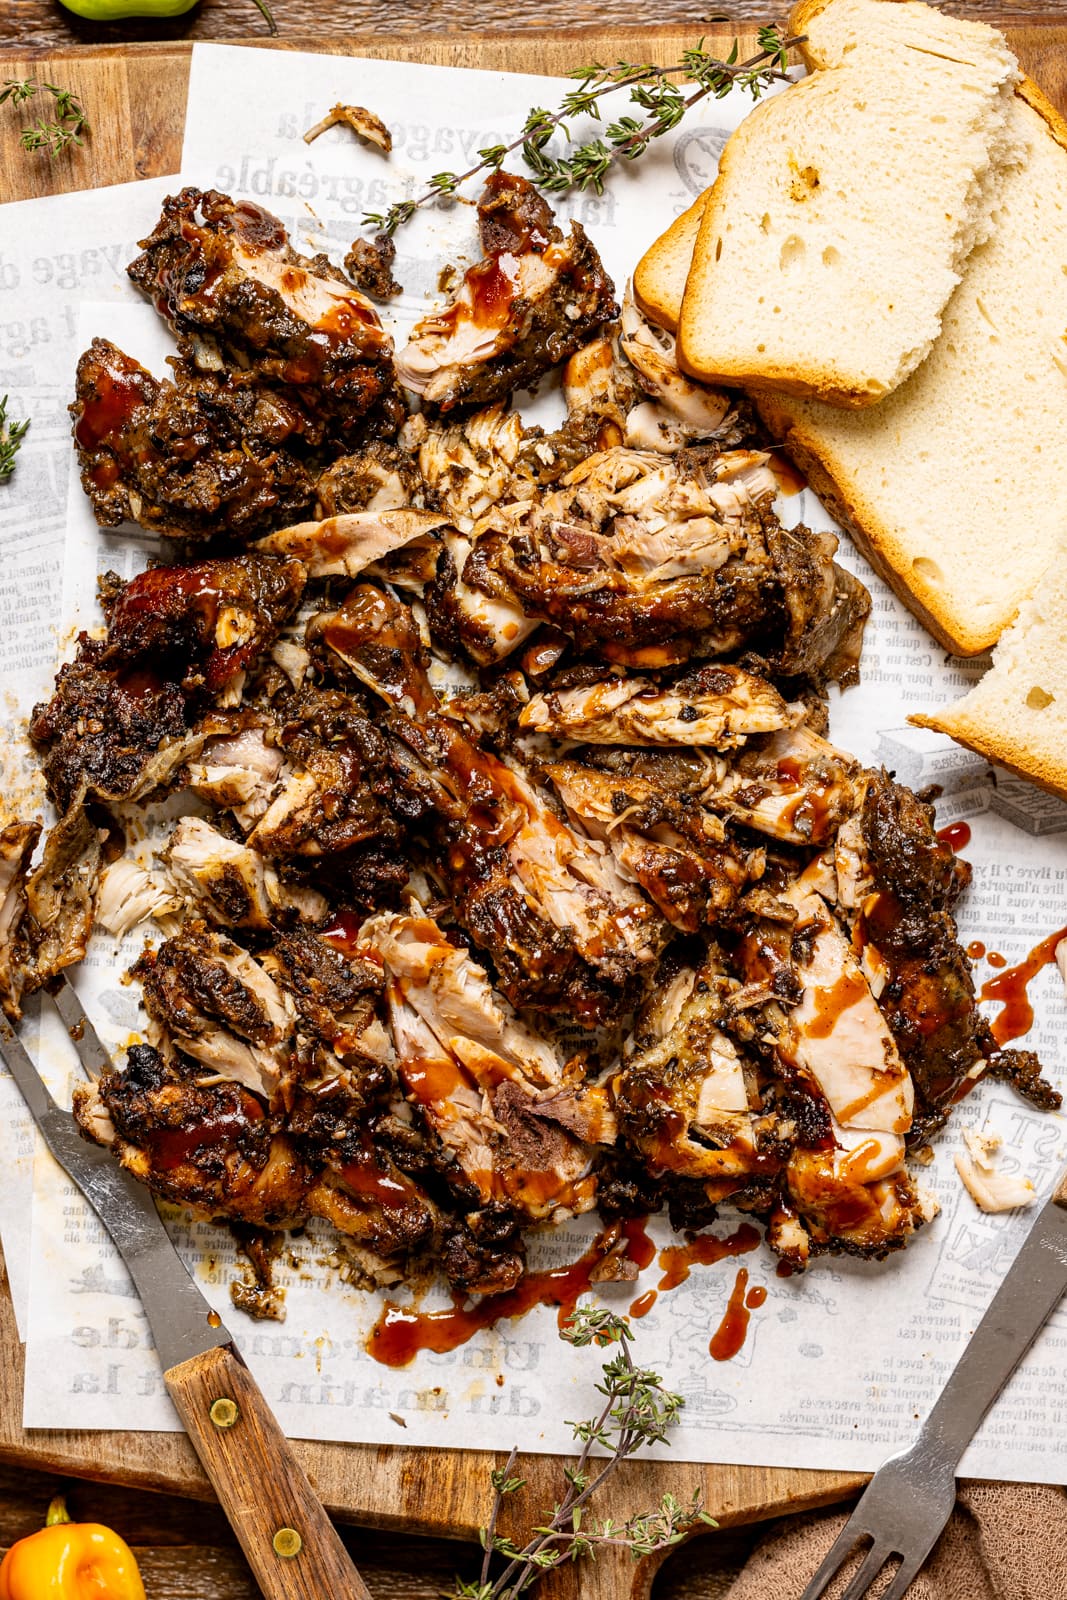 Chopped jerk chicken on a cutting board with BBQ sauce, bread, and a fork.